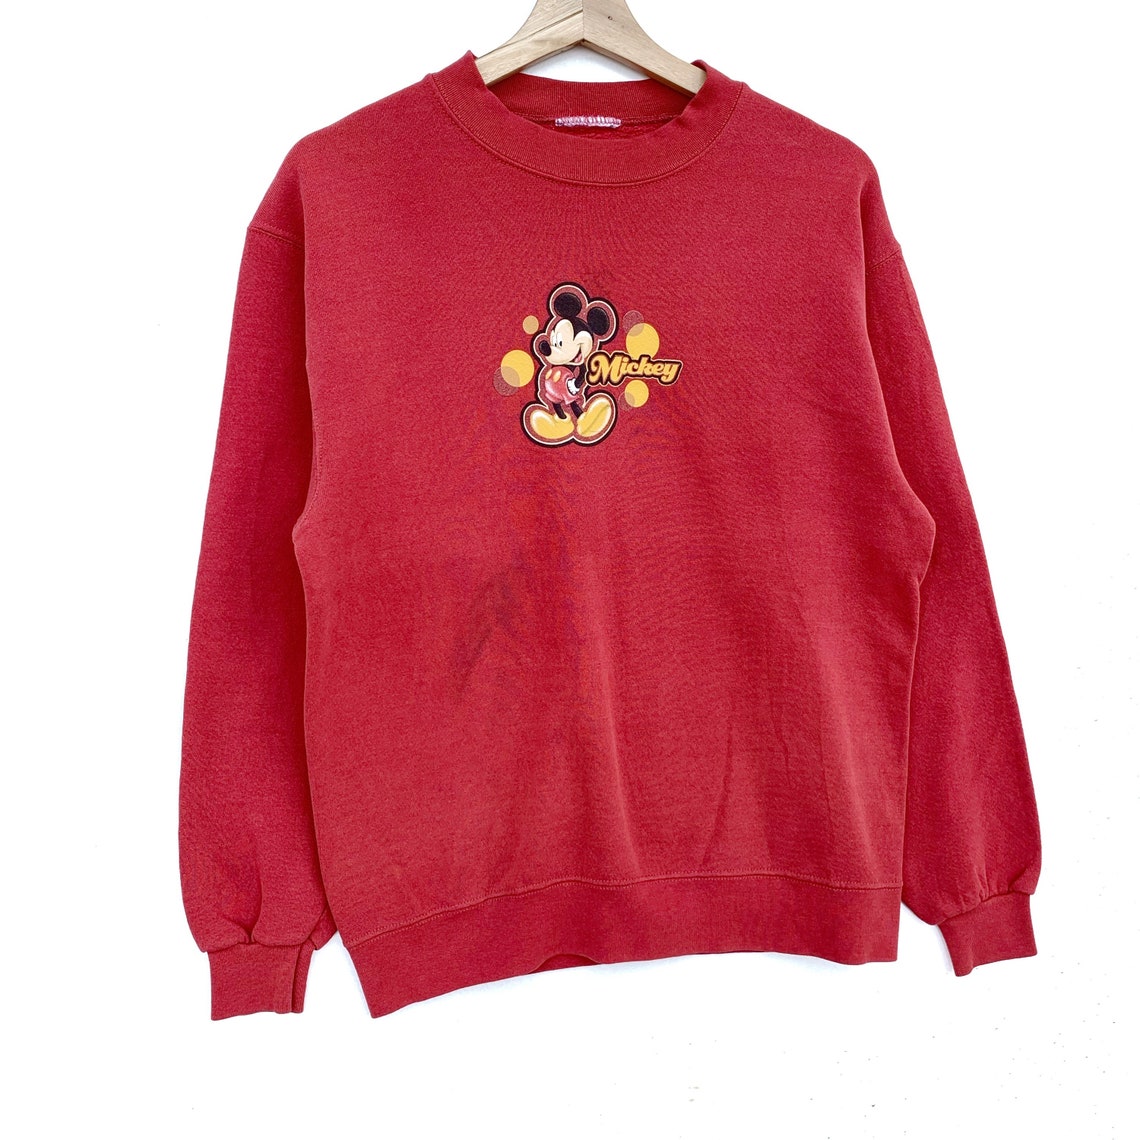 PICK Vintage Disney Crewneck Mickey Mouse Sweater Pullover - Etsy